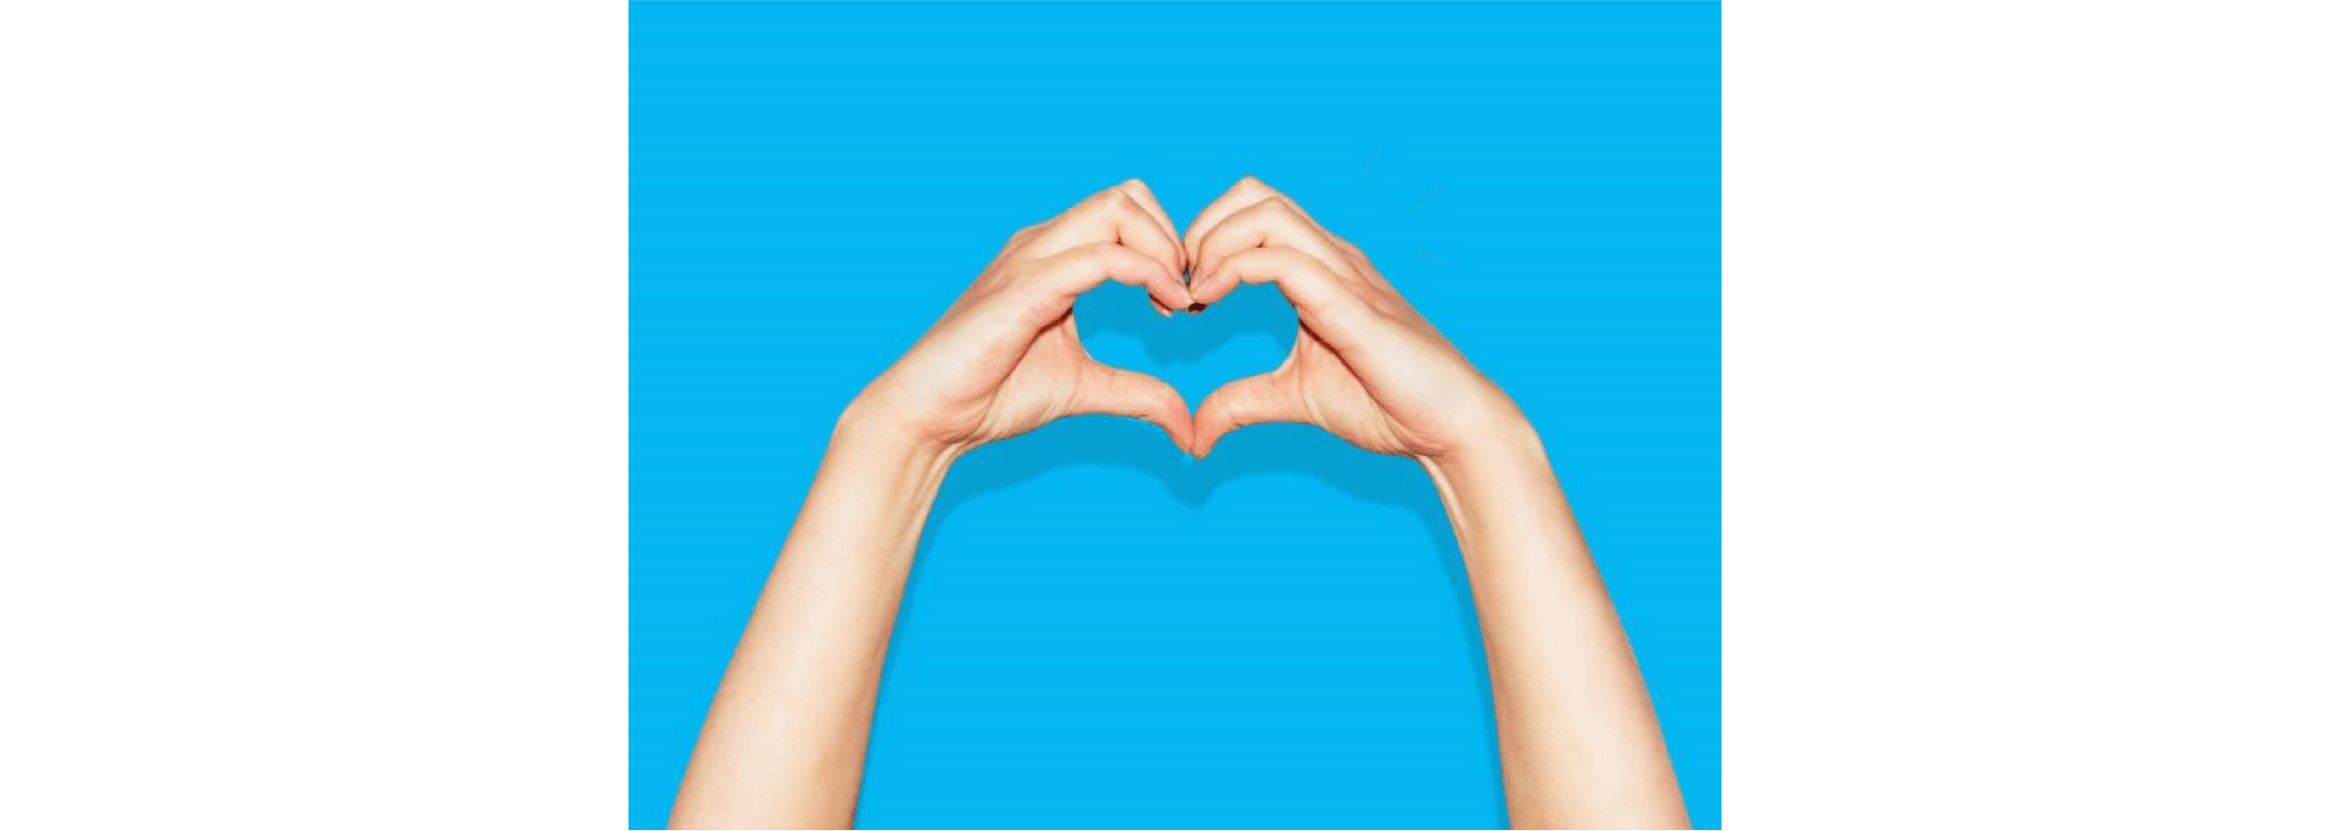 Hands in a heart shape represent the support Xero offers to businesses.